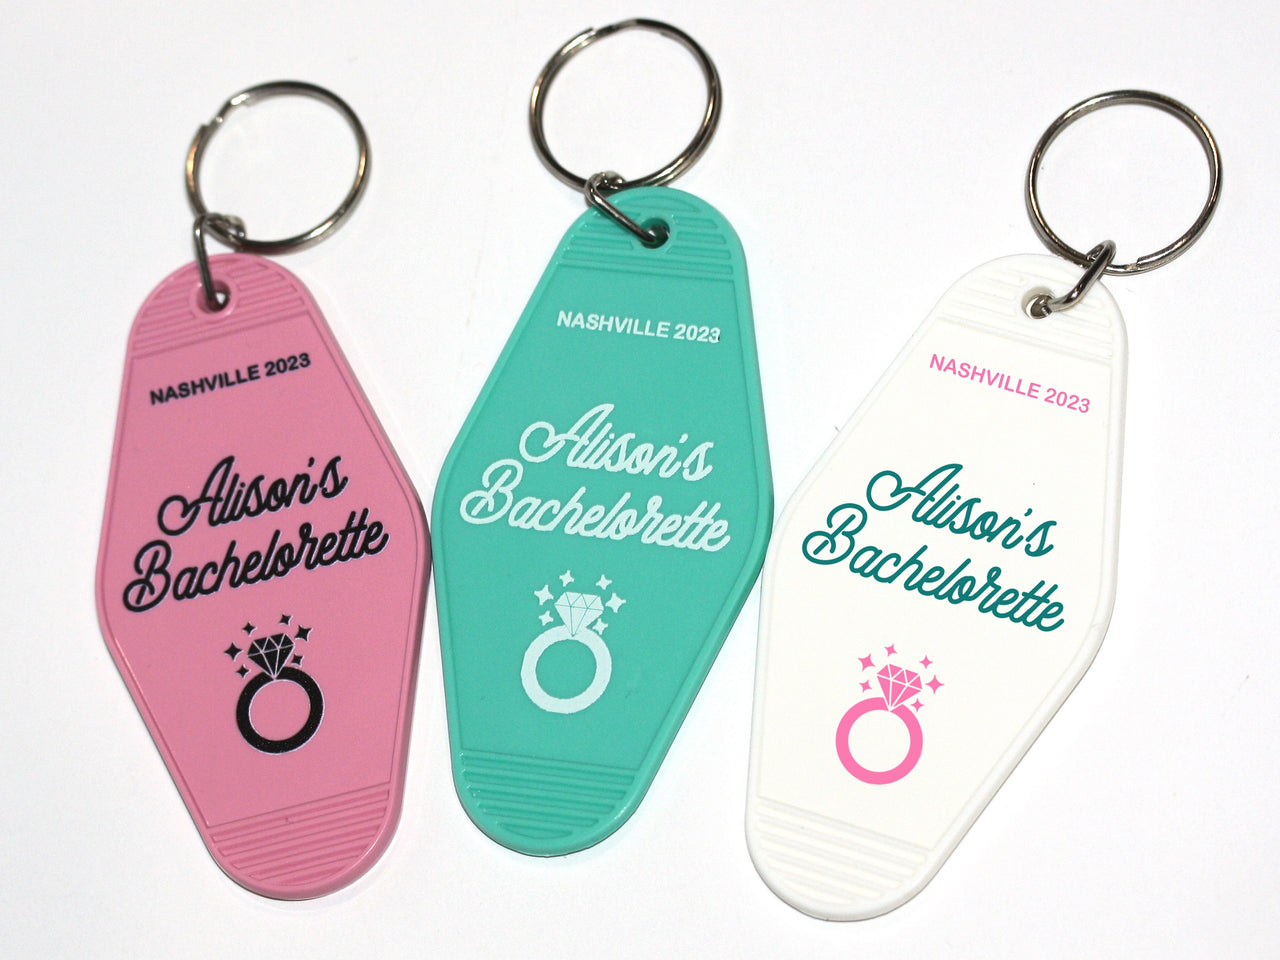 Set of 10 Camp Bachelorette Favors Retro Motel Keychains Custom Glamping Camping Outdoorsy Mountain Bach Adventure Asheville Lake House Tent